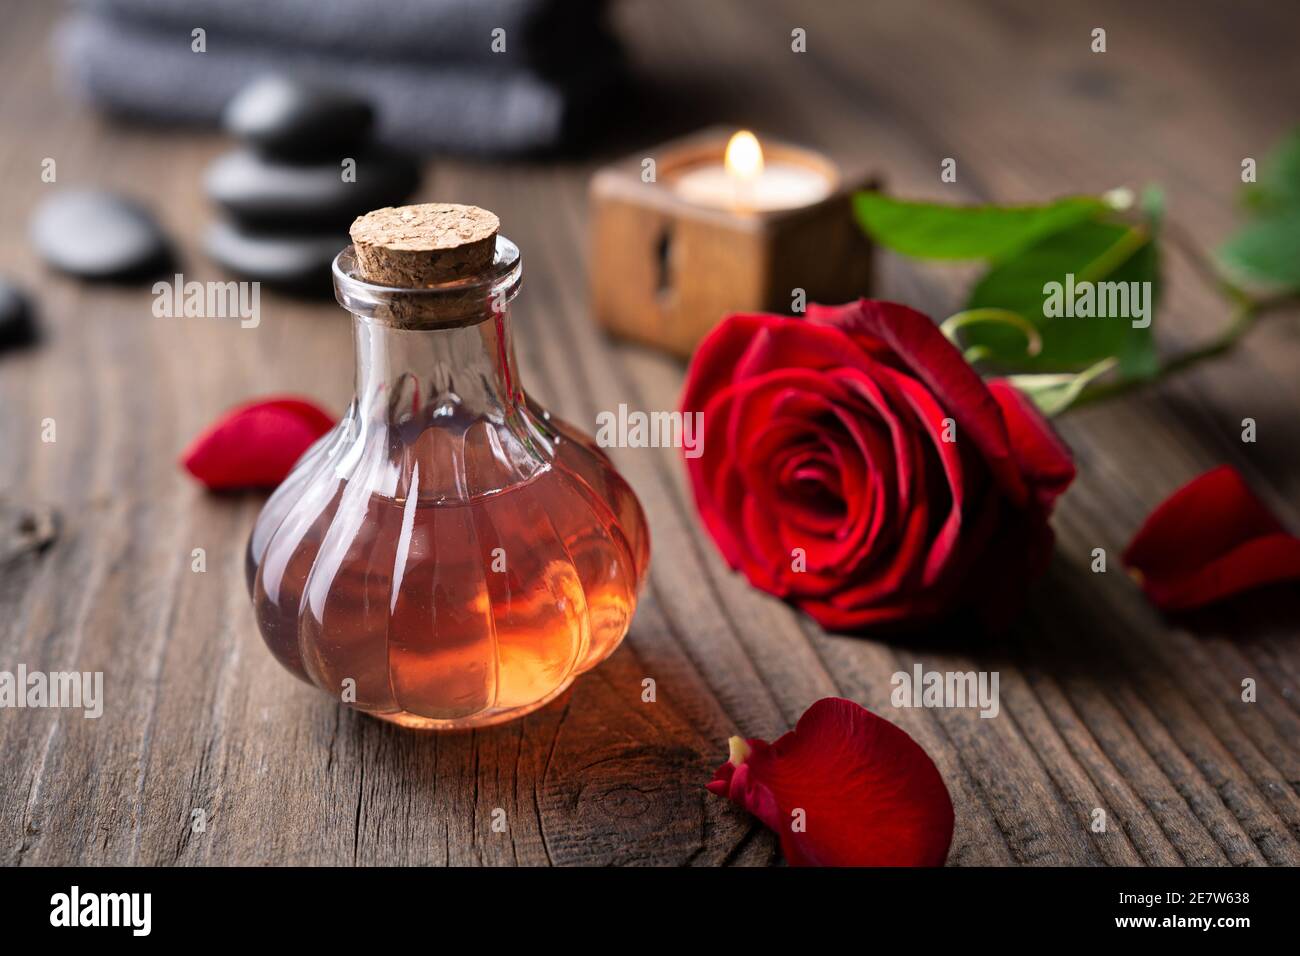 Fresh homemade infused rose water in a glass bottle for skin care routine on rustic wooden background Stock Photo